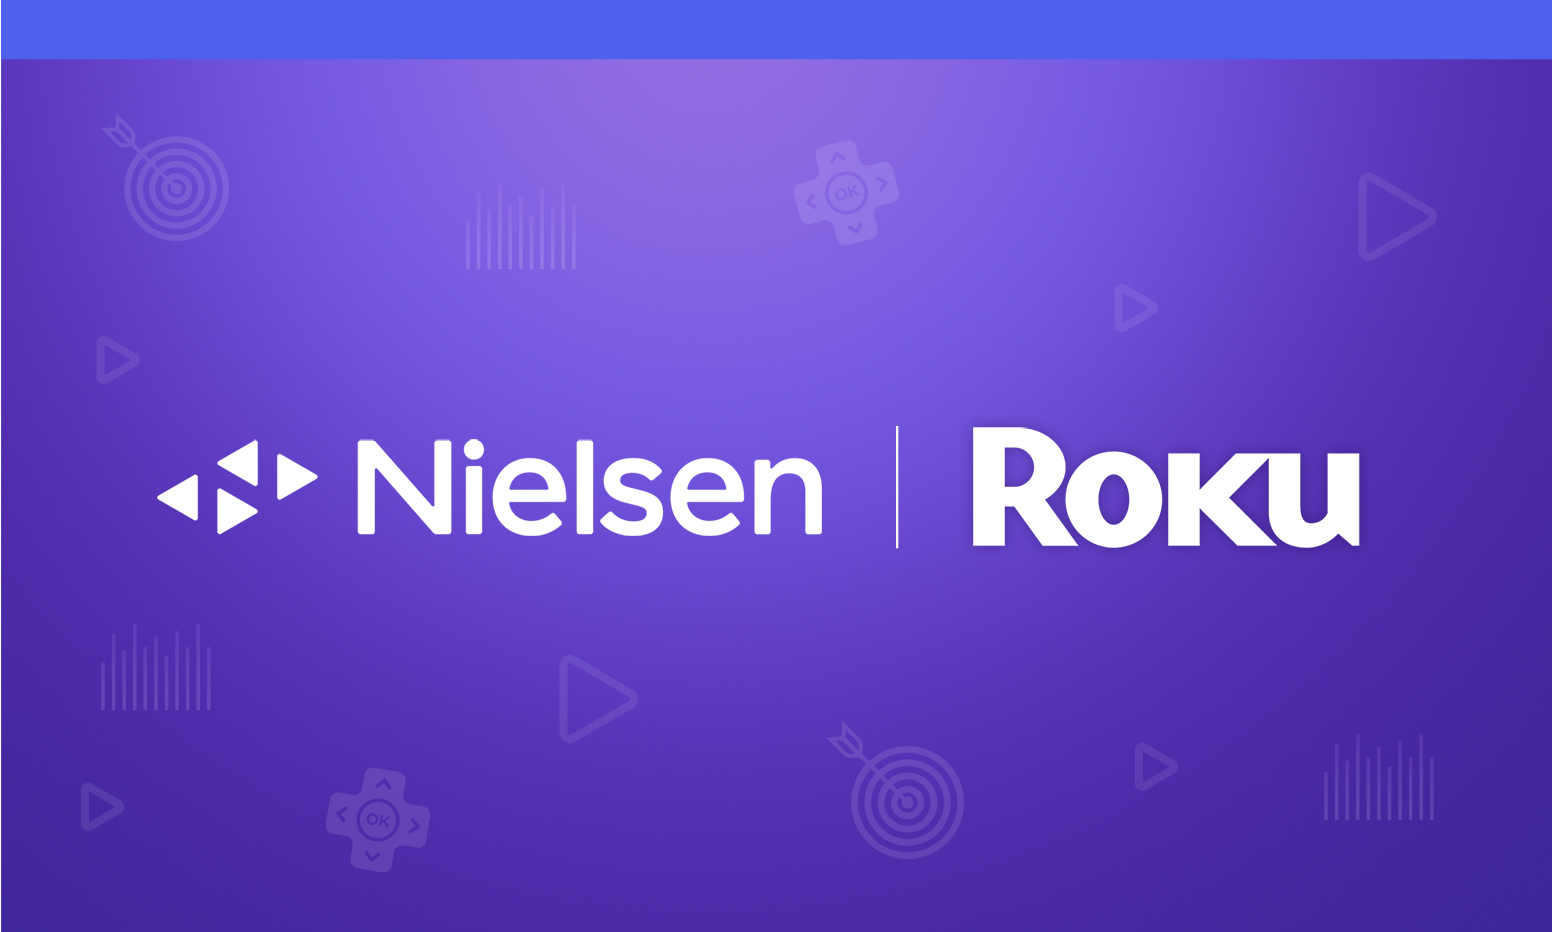 Roku's advertising ambitions just got even bigger with new Nielsen